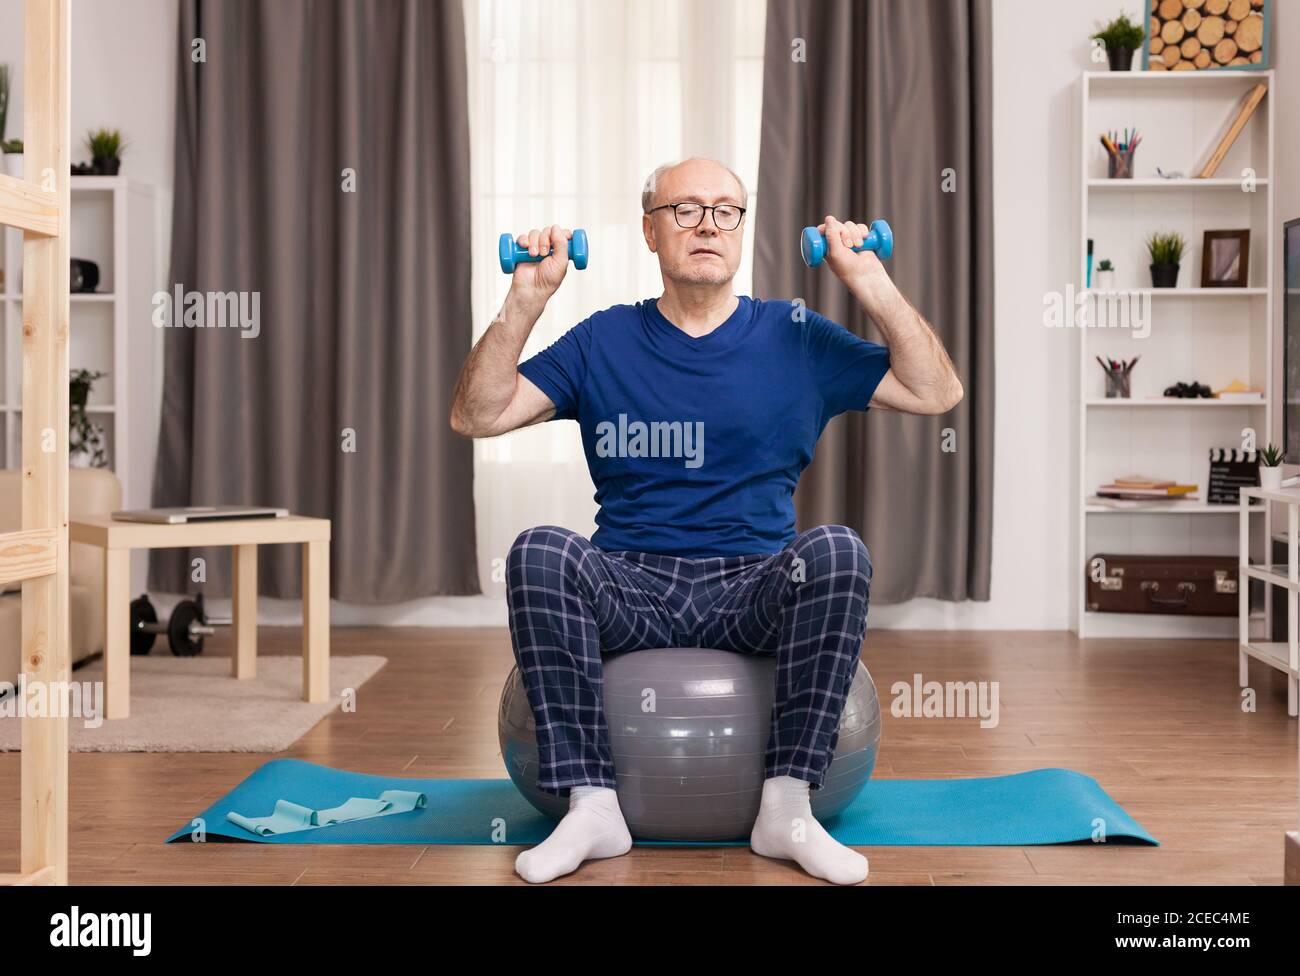 Senior man with vitality exercising in living room. Old person pensioner online internet exercise training at home sport activity with dumbbell, resistance band, swiss ball at elderly retirement age. Stock Photo